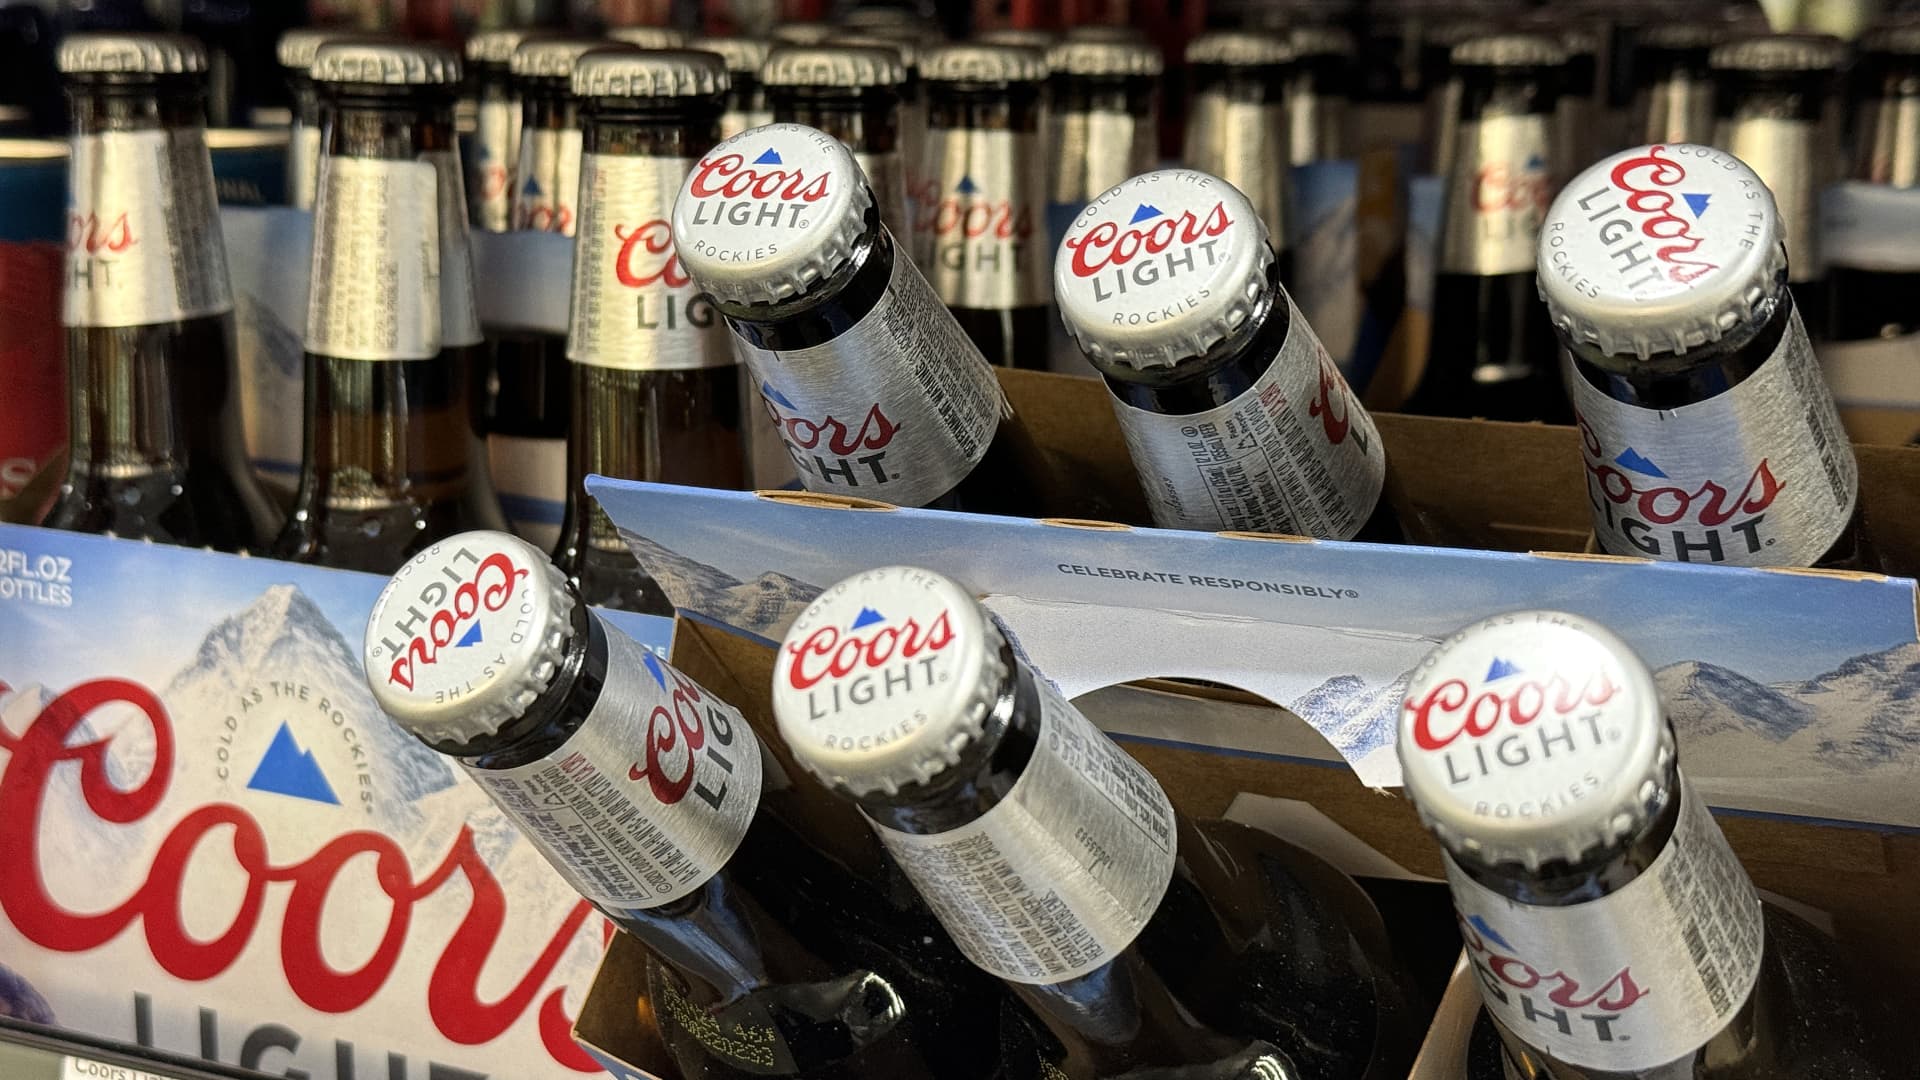 Molson Coors gains market share as consumers shift away from Bud Light